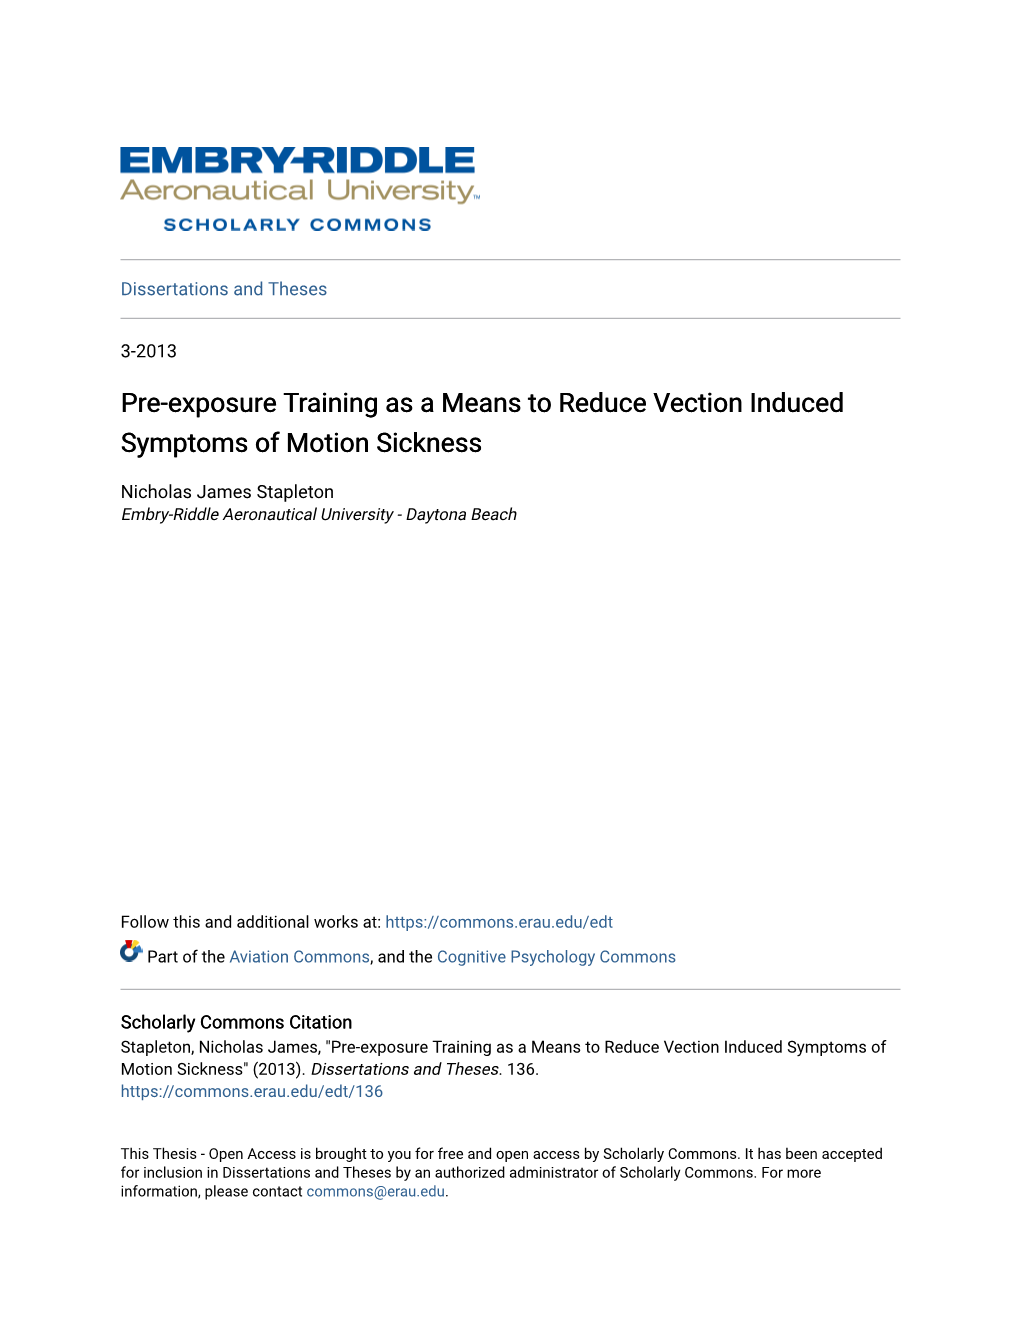 Pre-Exposure Training As a Means to Reduce Vection Induced Symptoms of Motion Sickness